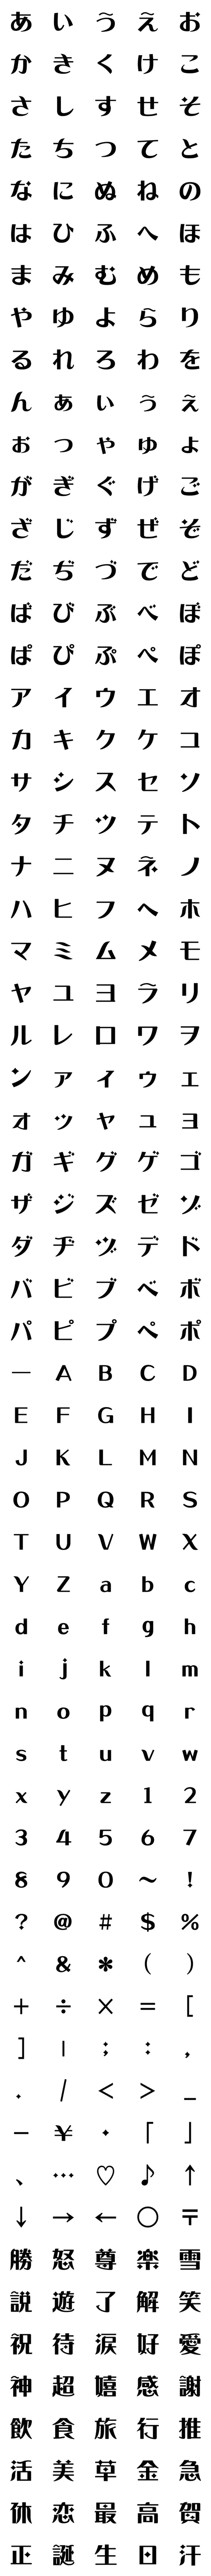 [LINE絵文字]DFロマン雪 フォント絵文字の画像一覧